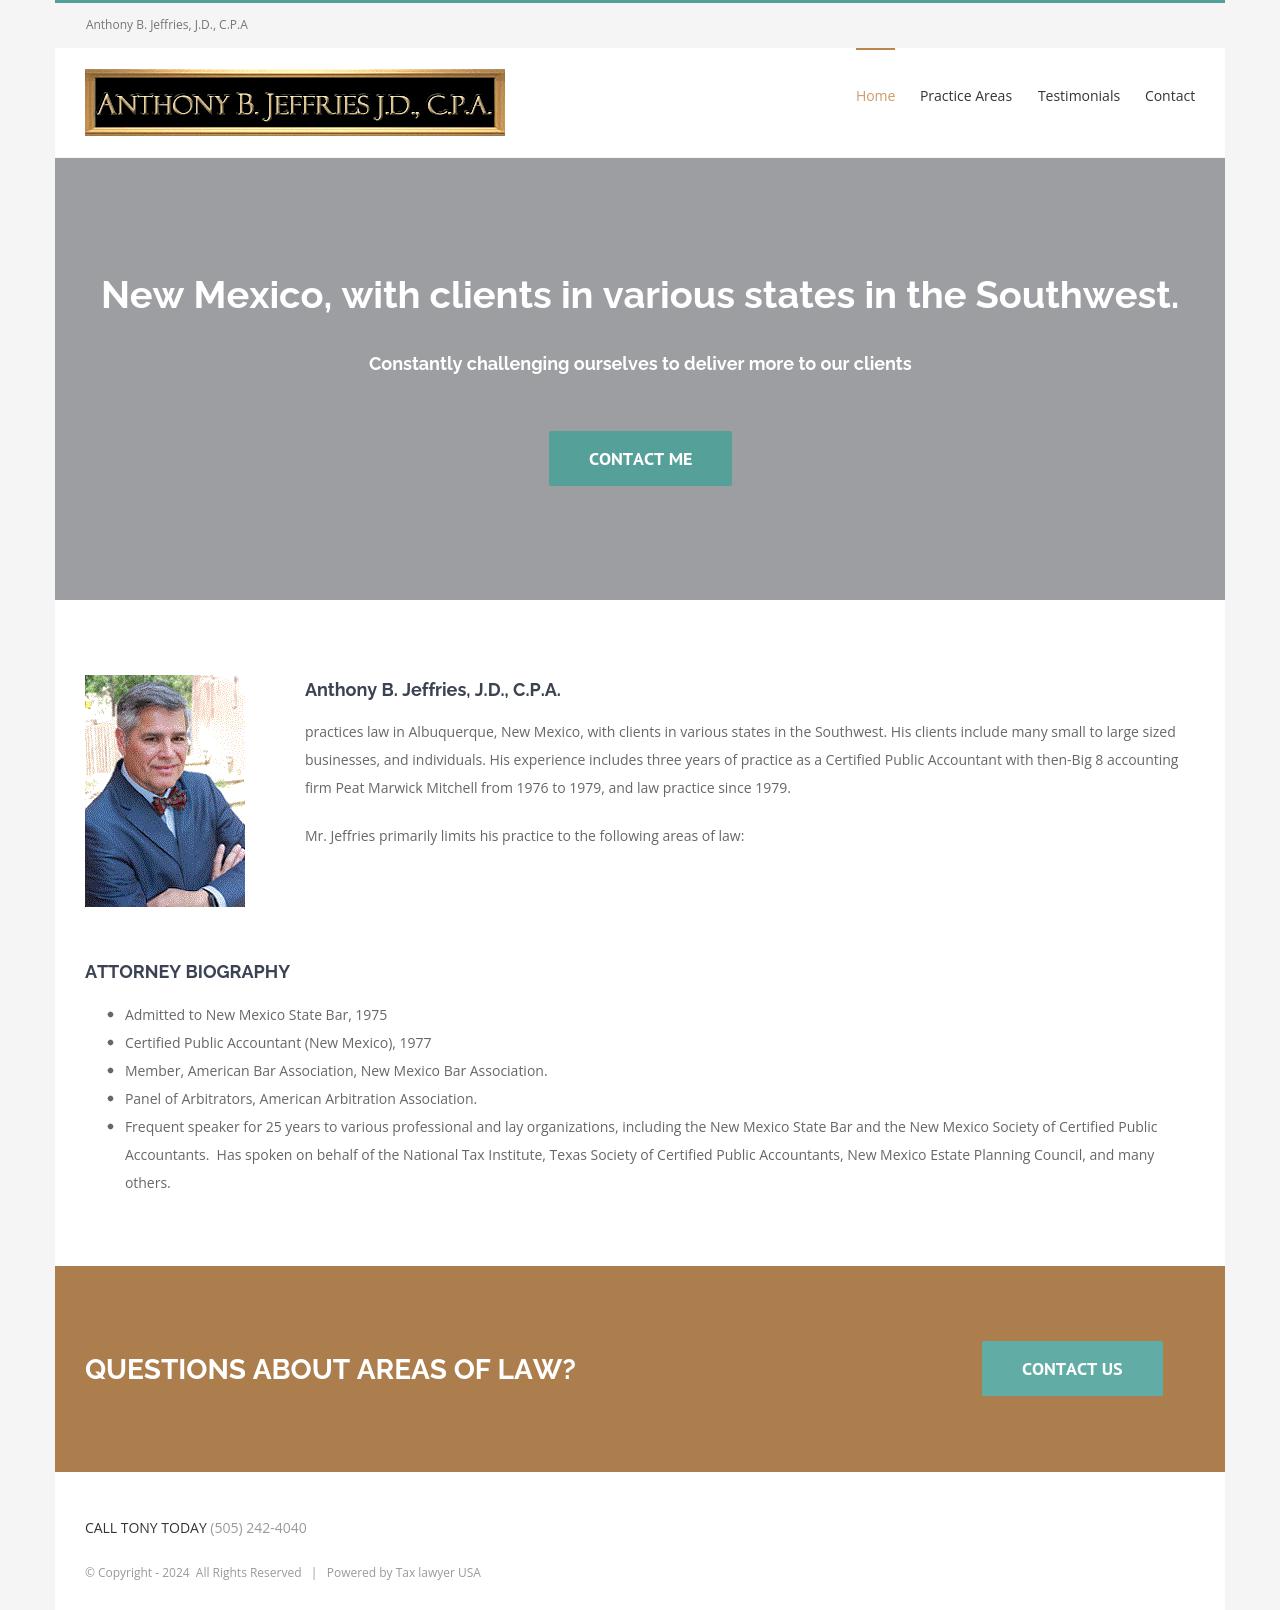 Jeffries Anthony B JD CPA - Los Ranchos NM Lawyers